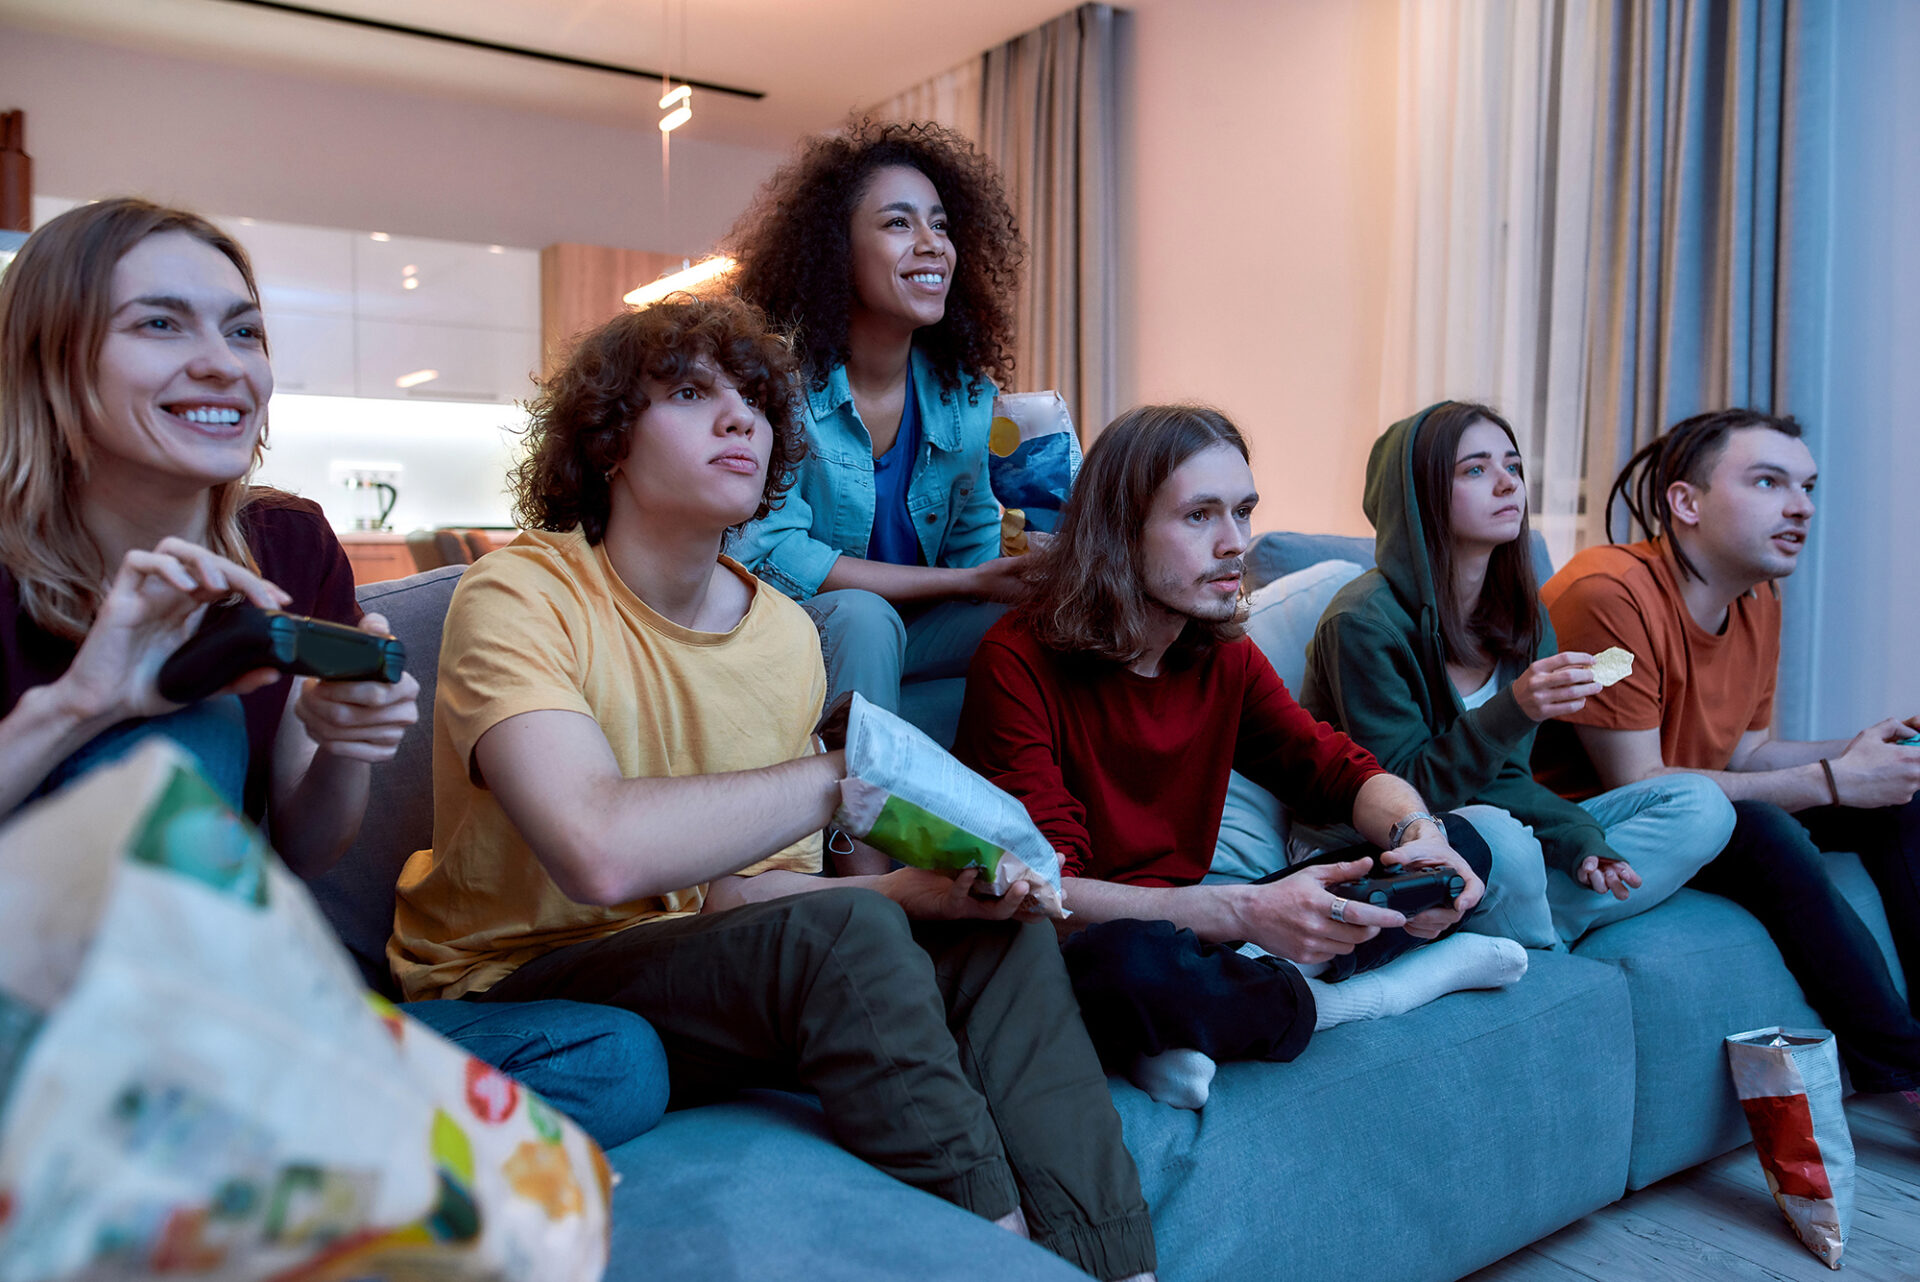 A group of friends playing video games.